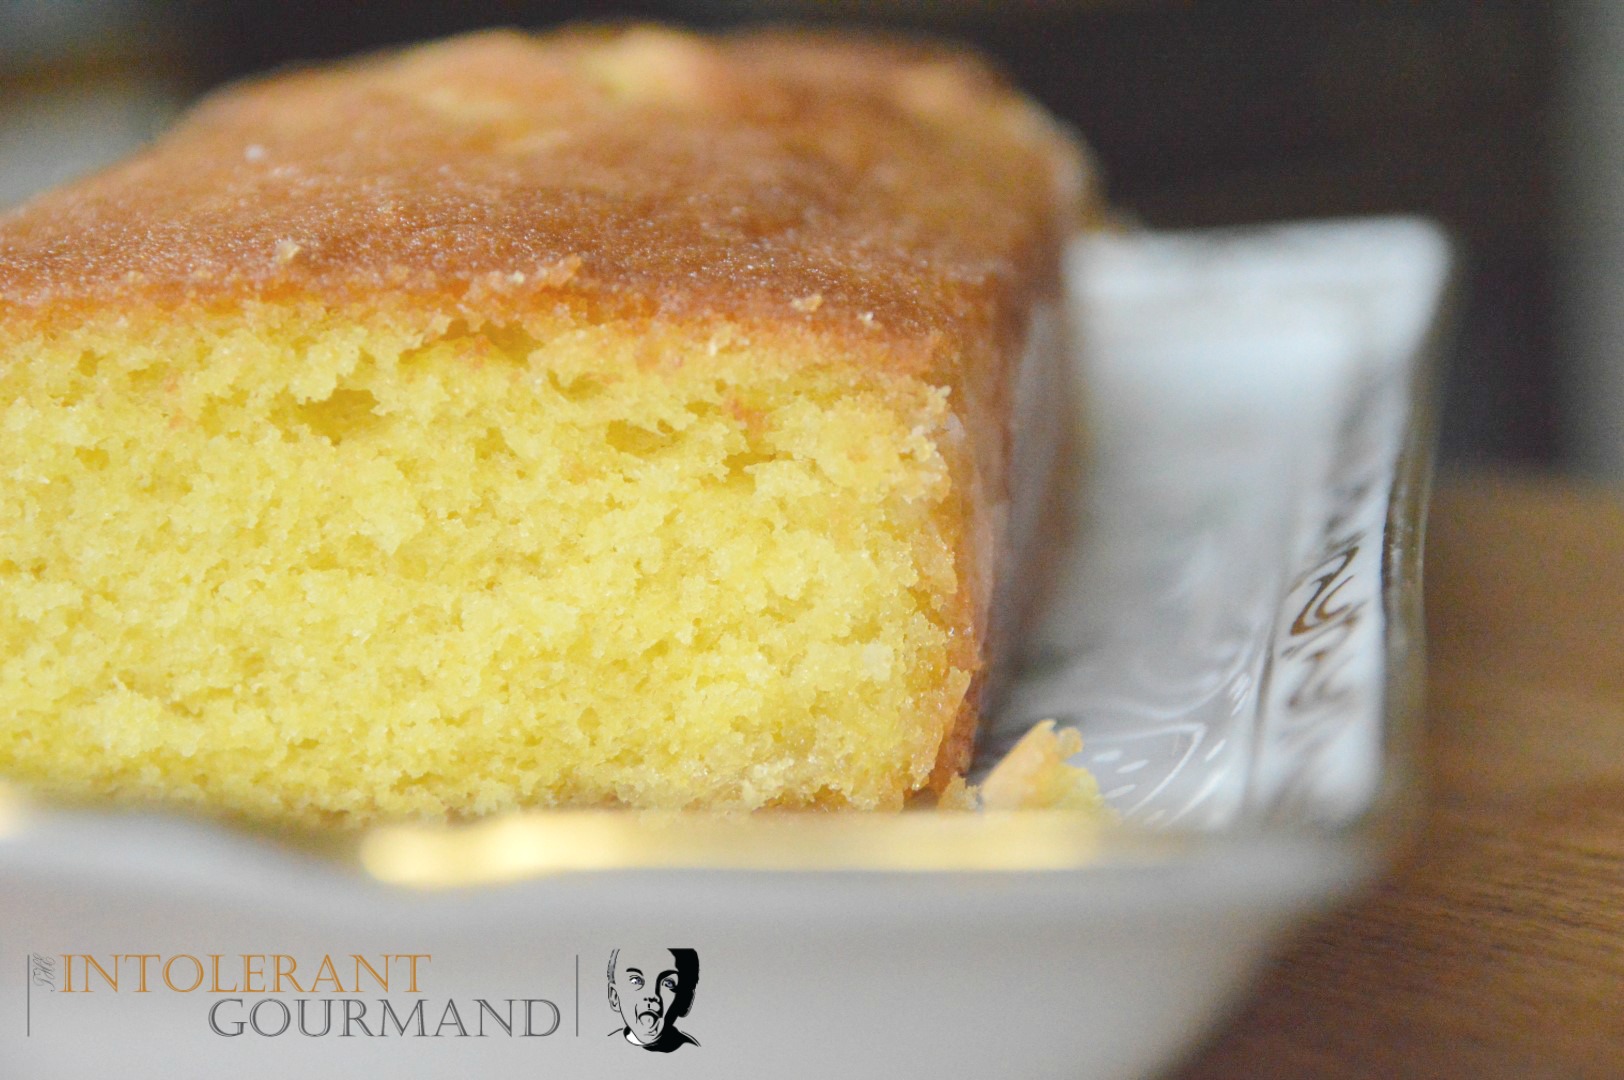 Gluten free dairy free lemon drizzle cake - a deliciously light and fluffy sponge made with Free From Fairy flour www.intolerantgourmand.com